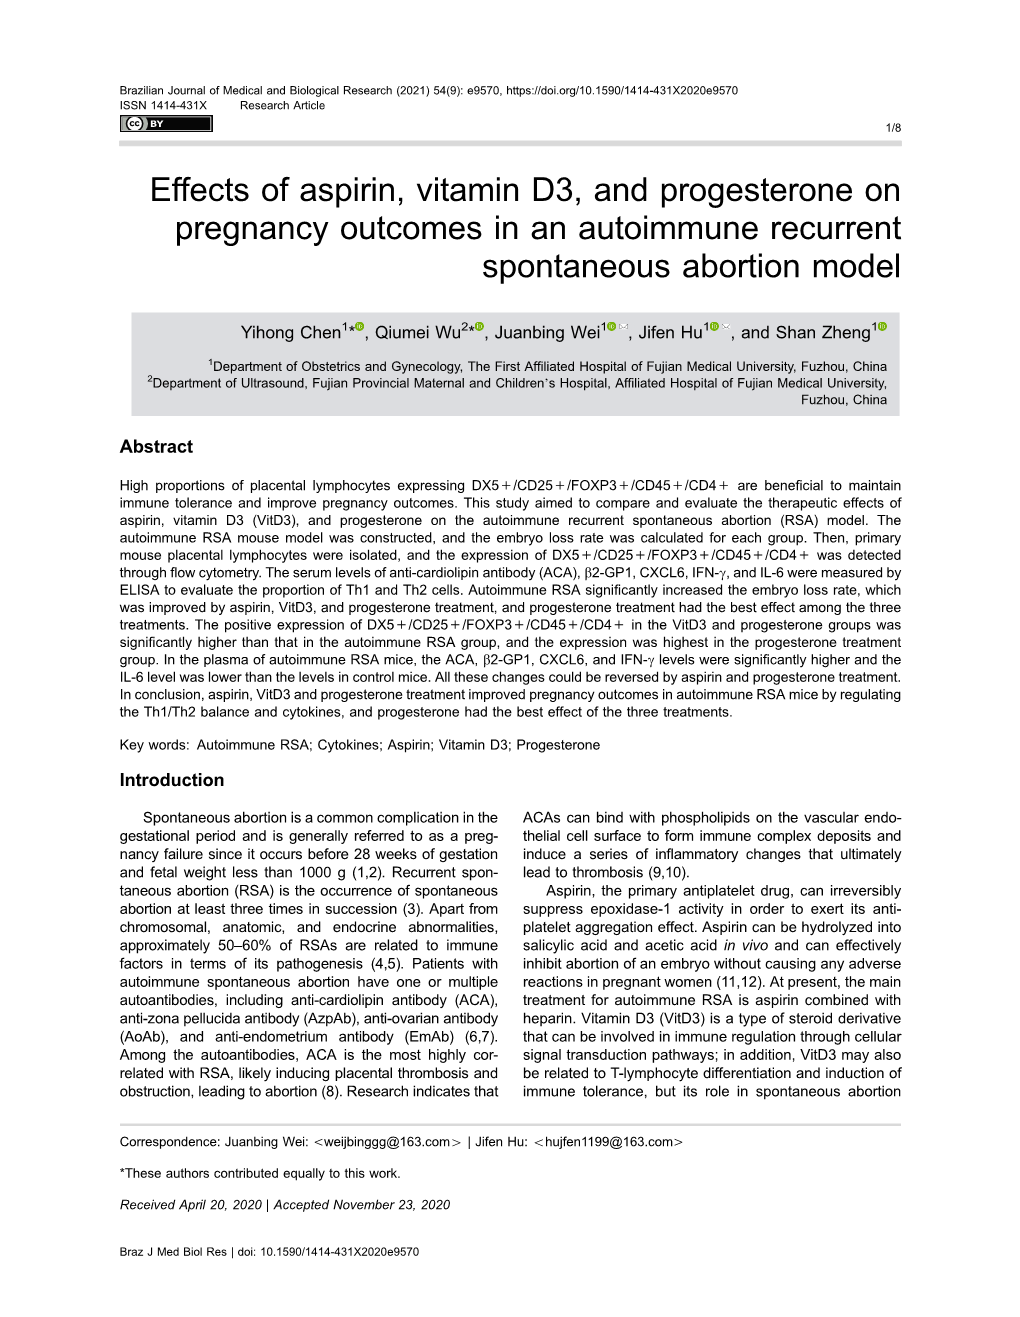 Effects of Aspirin, Vitamin D3, and Progesterone on Pregnancy Outcomes in an Autoimmune Recurrent Spontaneous Abortion Model